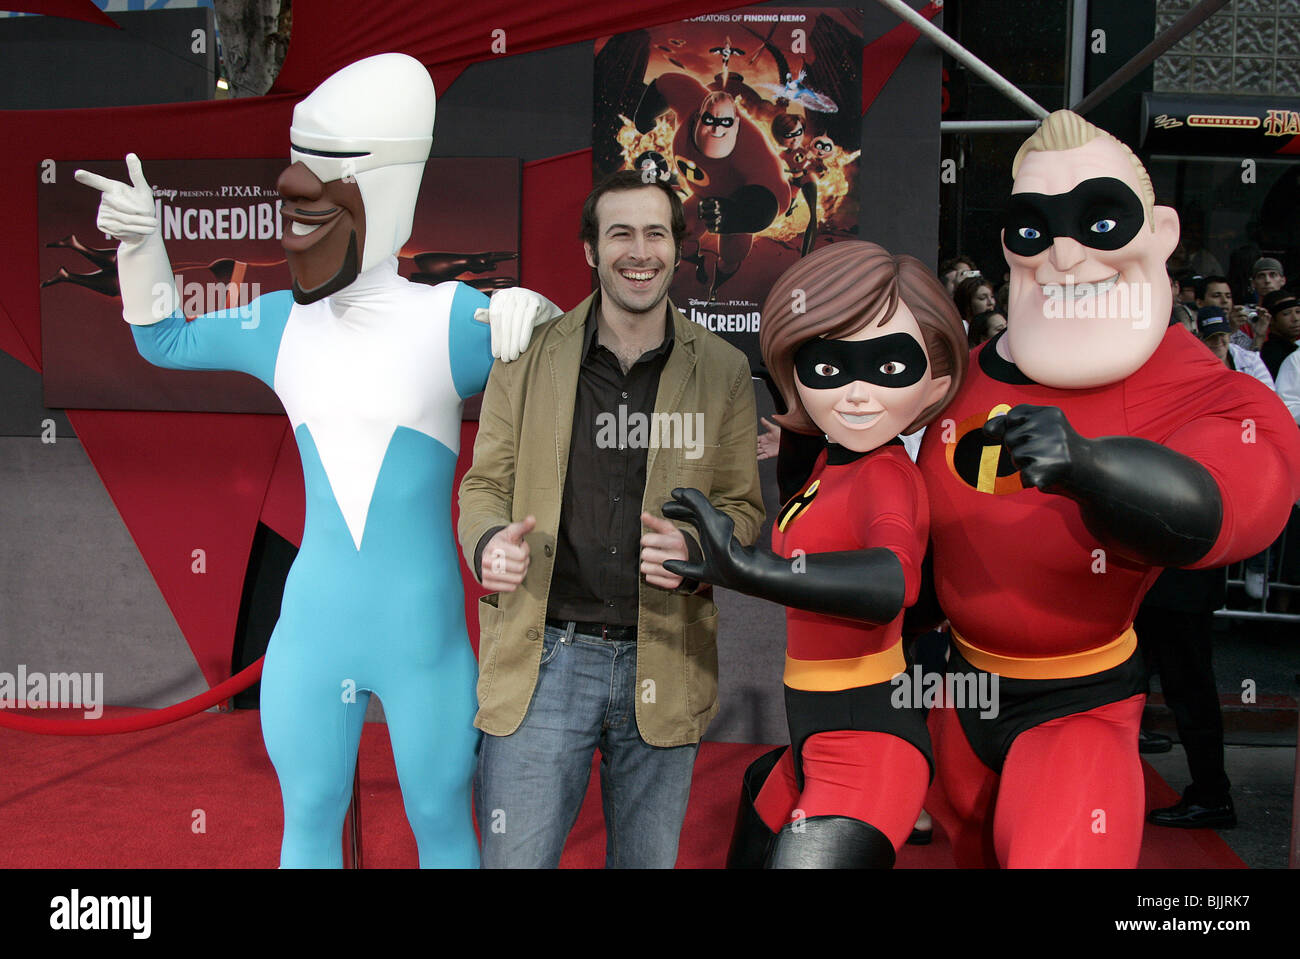 JASON LEE & THE INCREDIBLES THE INCREDIBLES WORLD PREMIER HOLLYWOOD LOS  ANGELES USA 24 October 2004 Stock Photo - Alamy